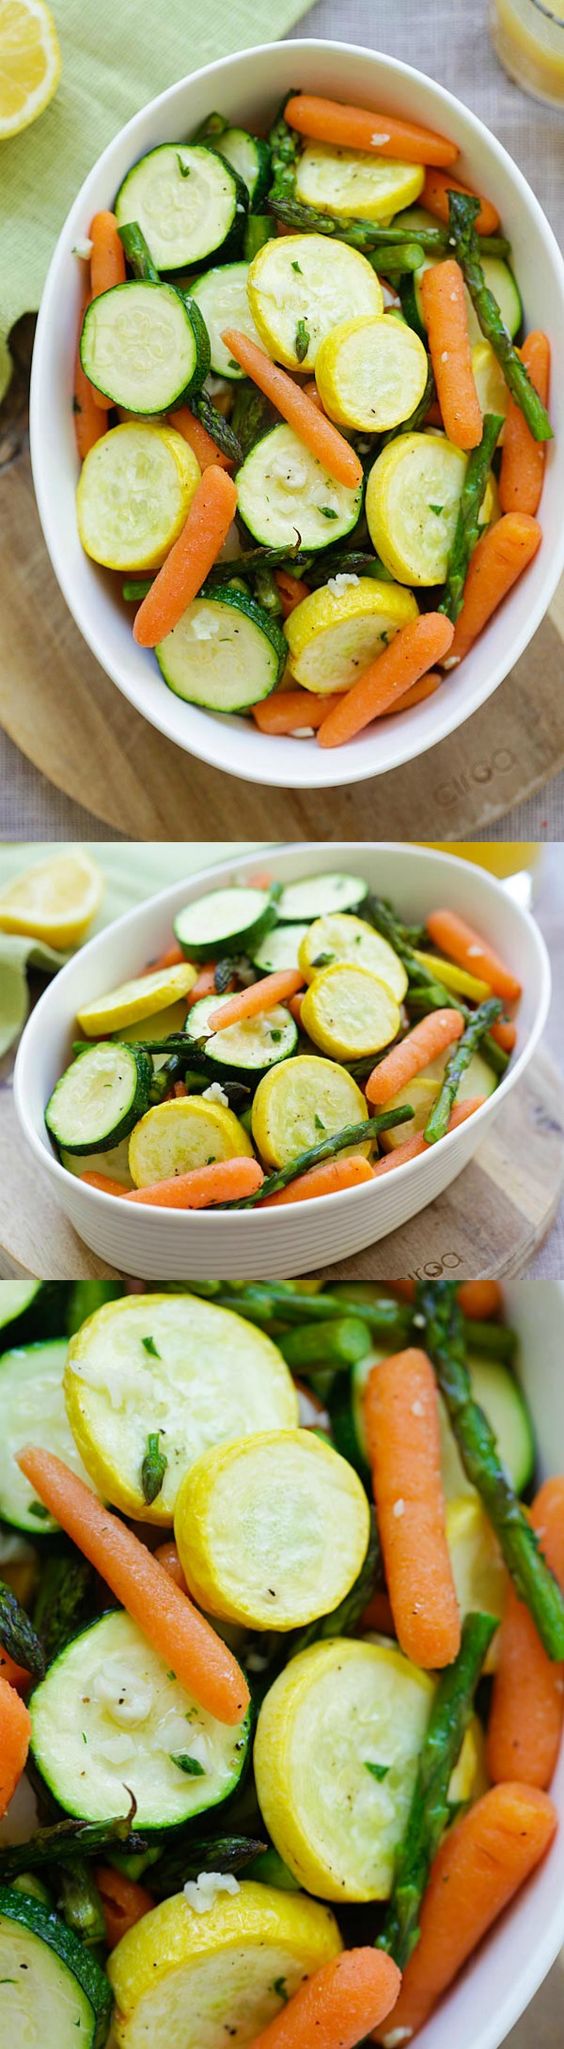 Roasted Spring Vegetables - healthy seasonal spring vegetables roasted with garlic herb butter. Perfect side dish that takes only 20 mins | rasamalaysia.com